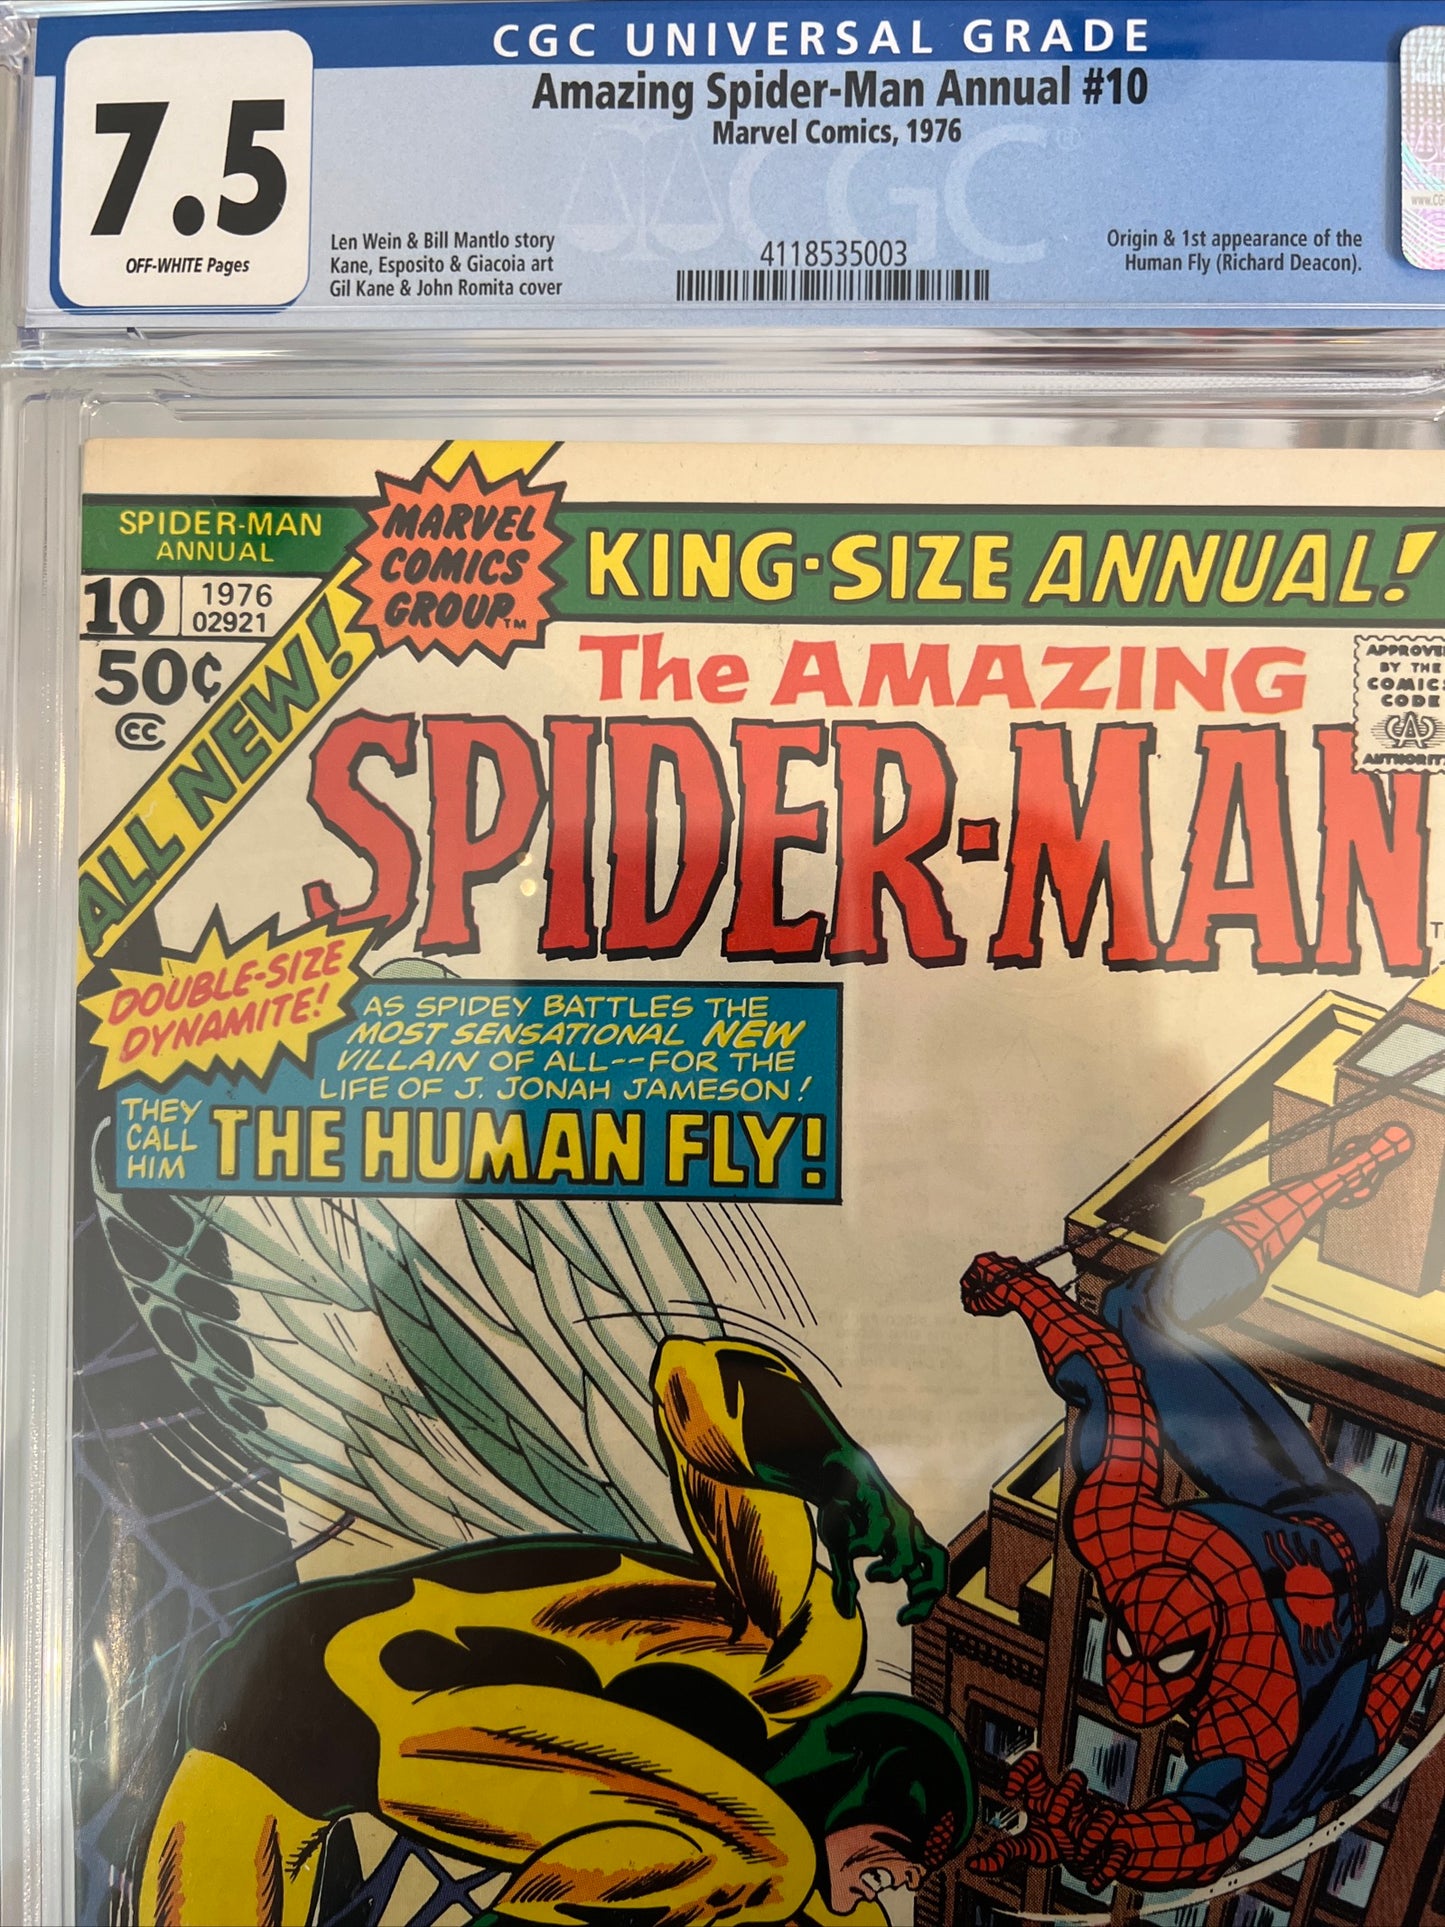 Amazing Spider-Man Annual #10 (1976) CGC 7.5 (1st Appearance of Human Fly)